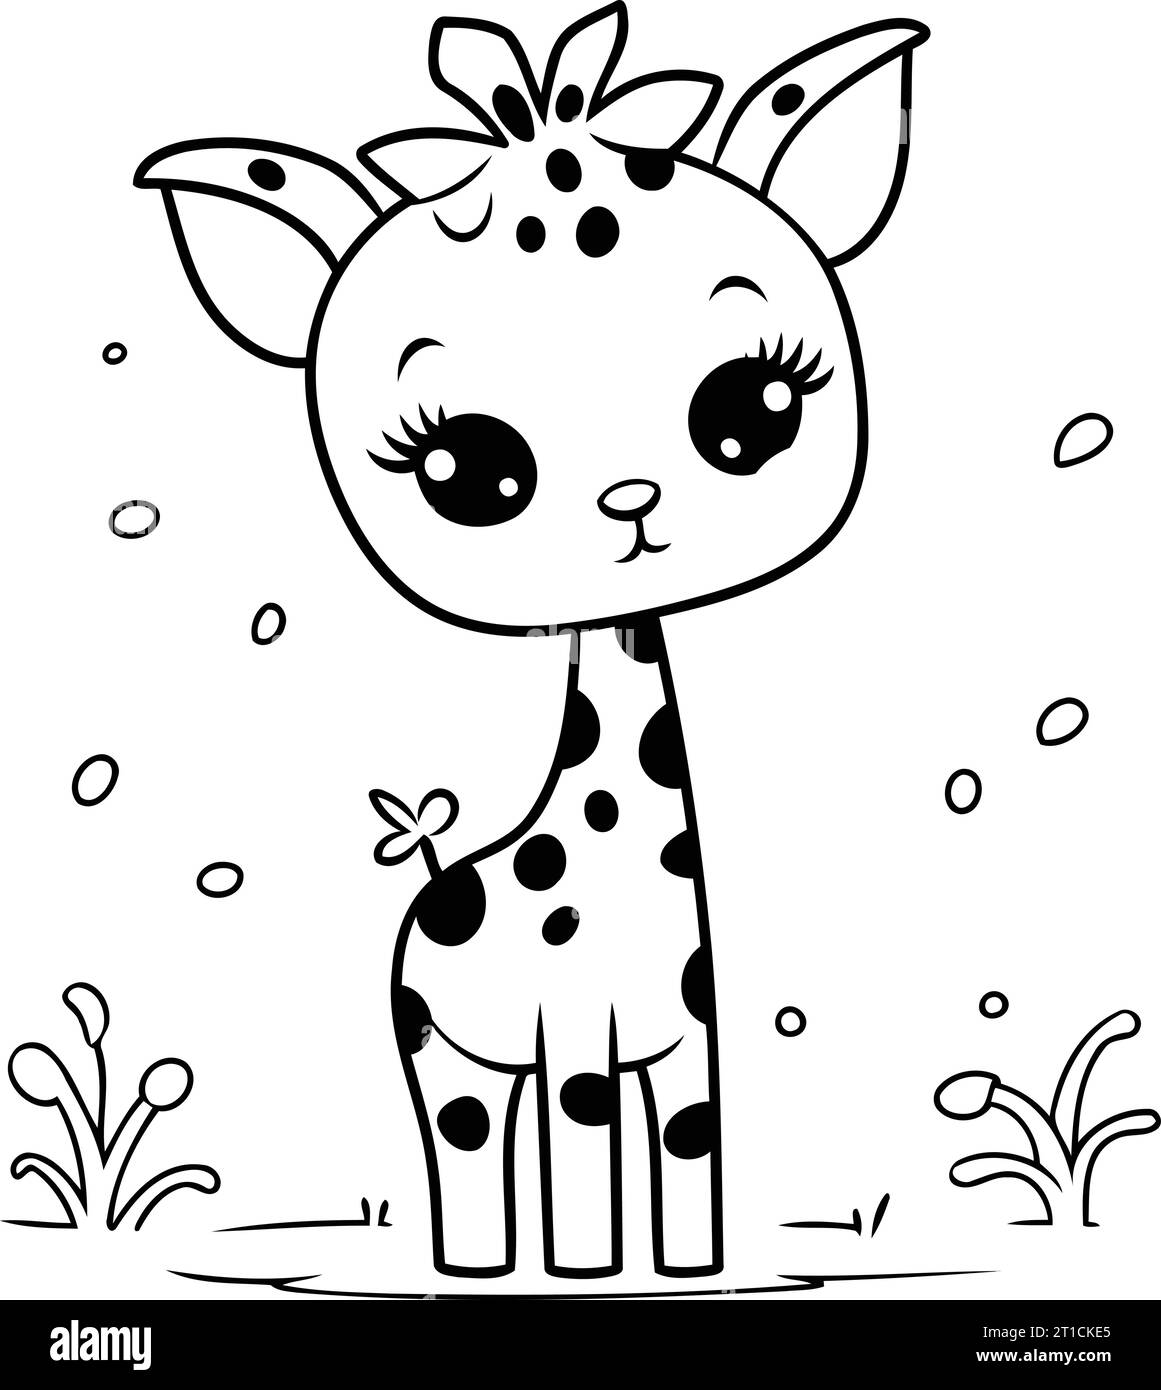 Cute baby giraffe. Black and white vector illustration for coloring book. Stock Vector